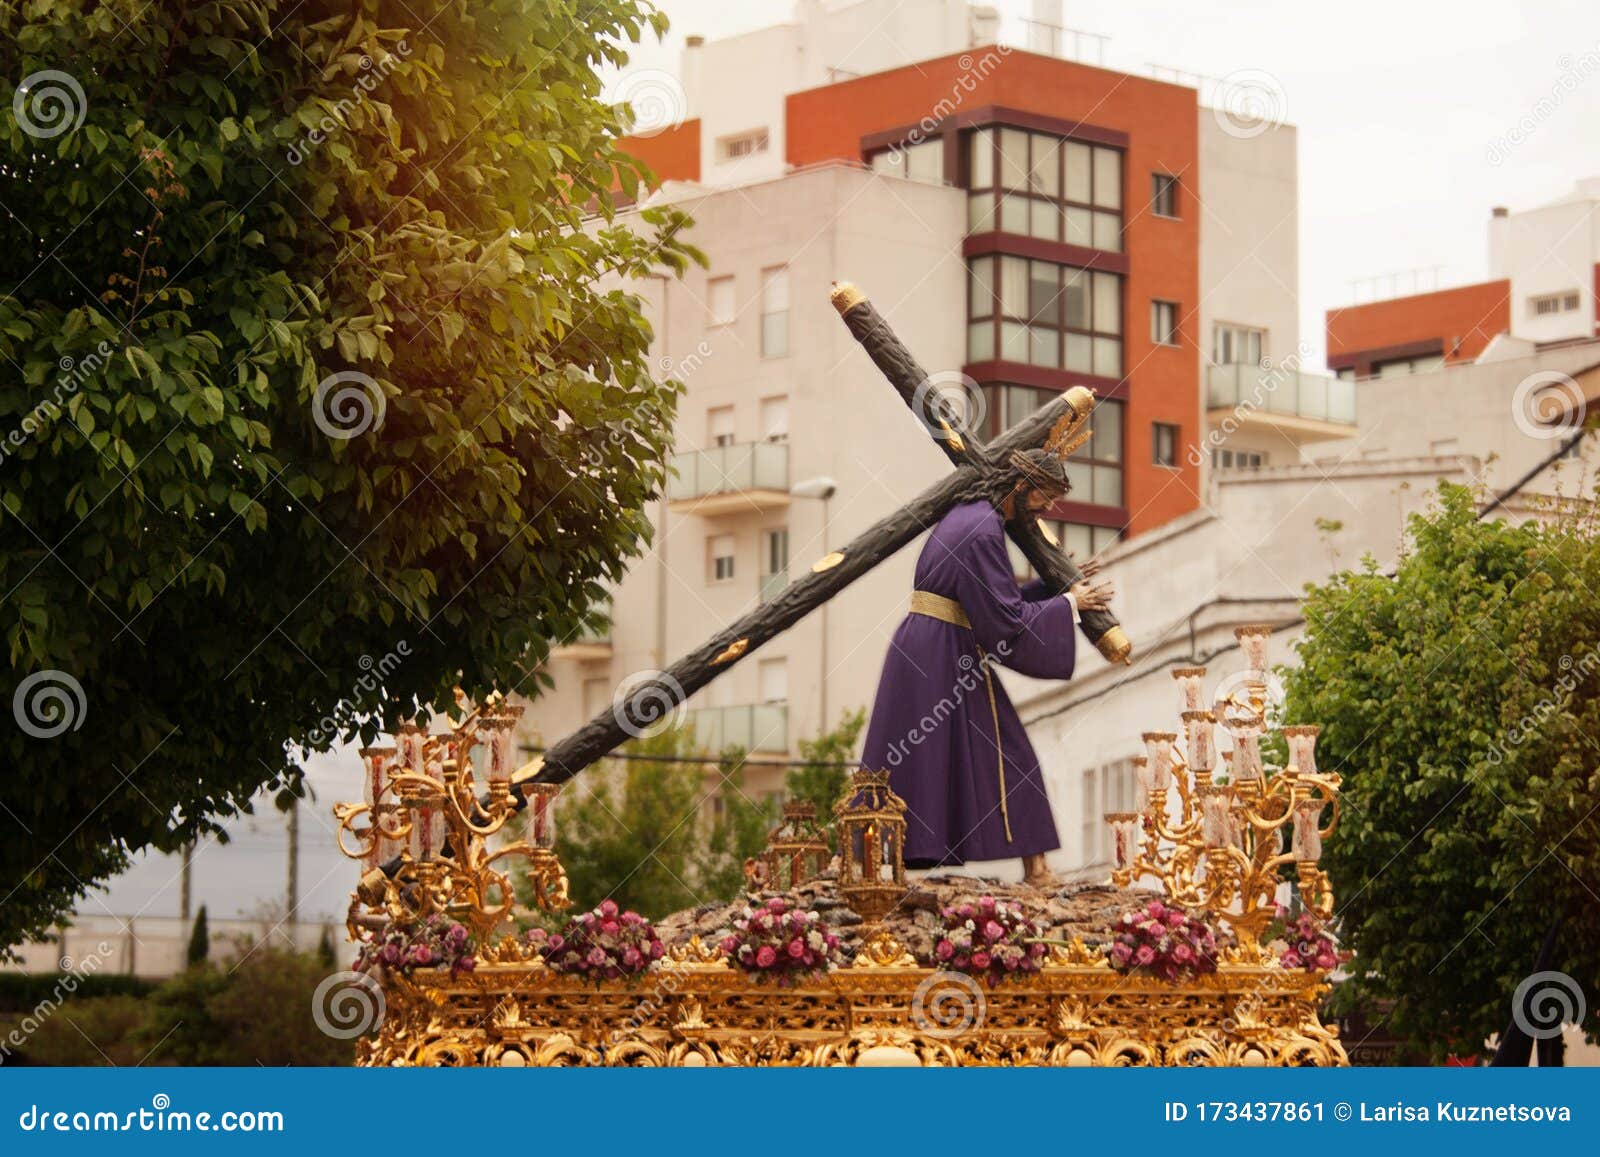 holy week in spain ,the procession